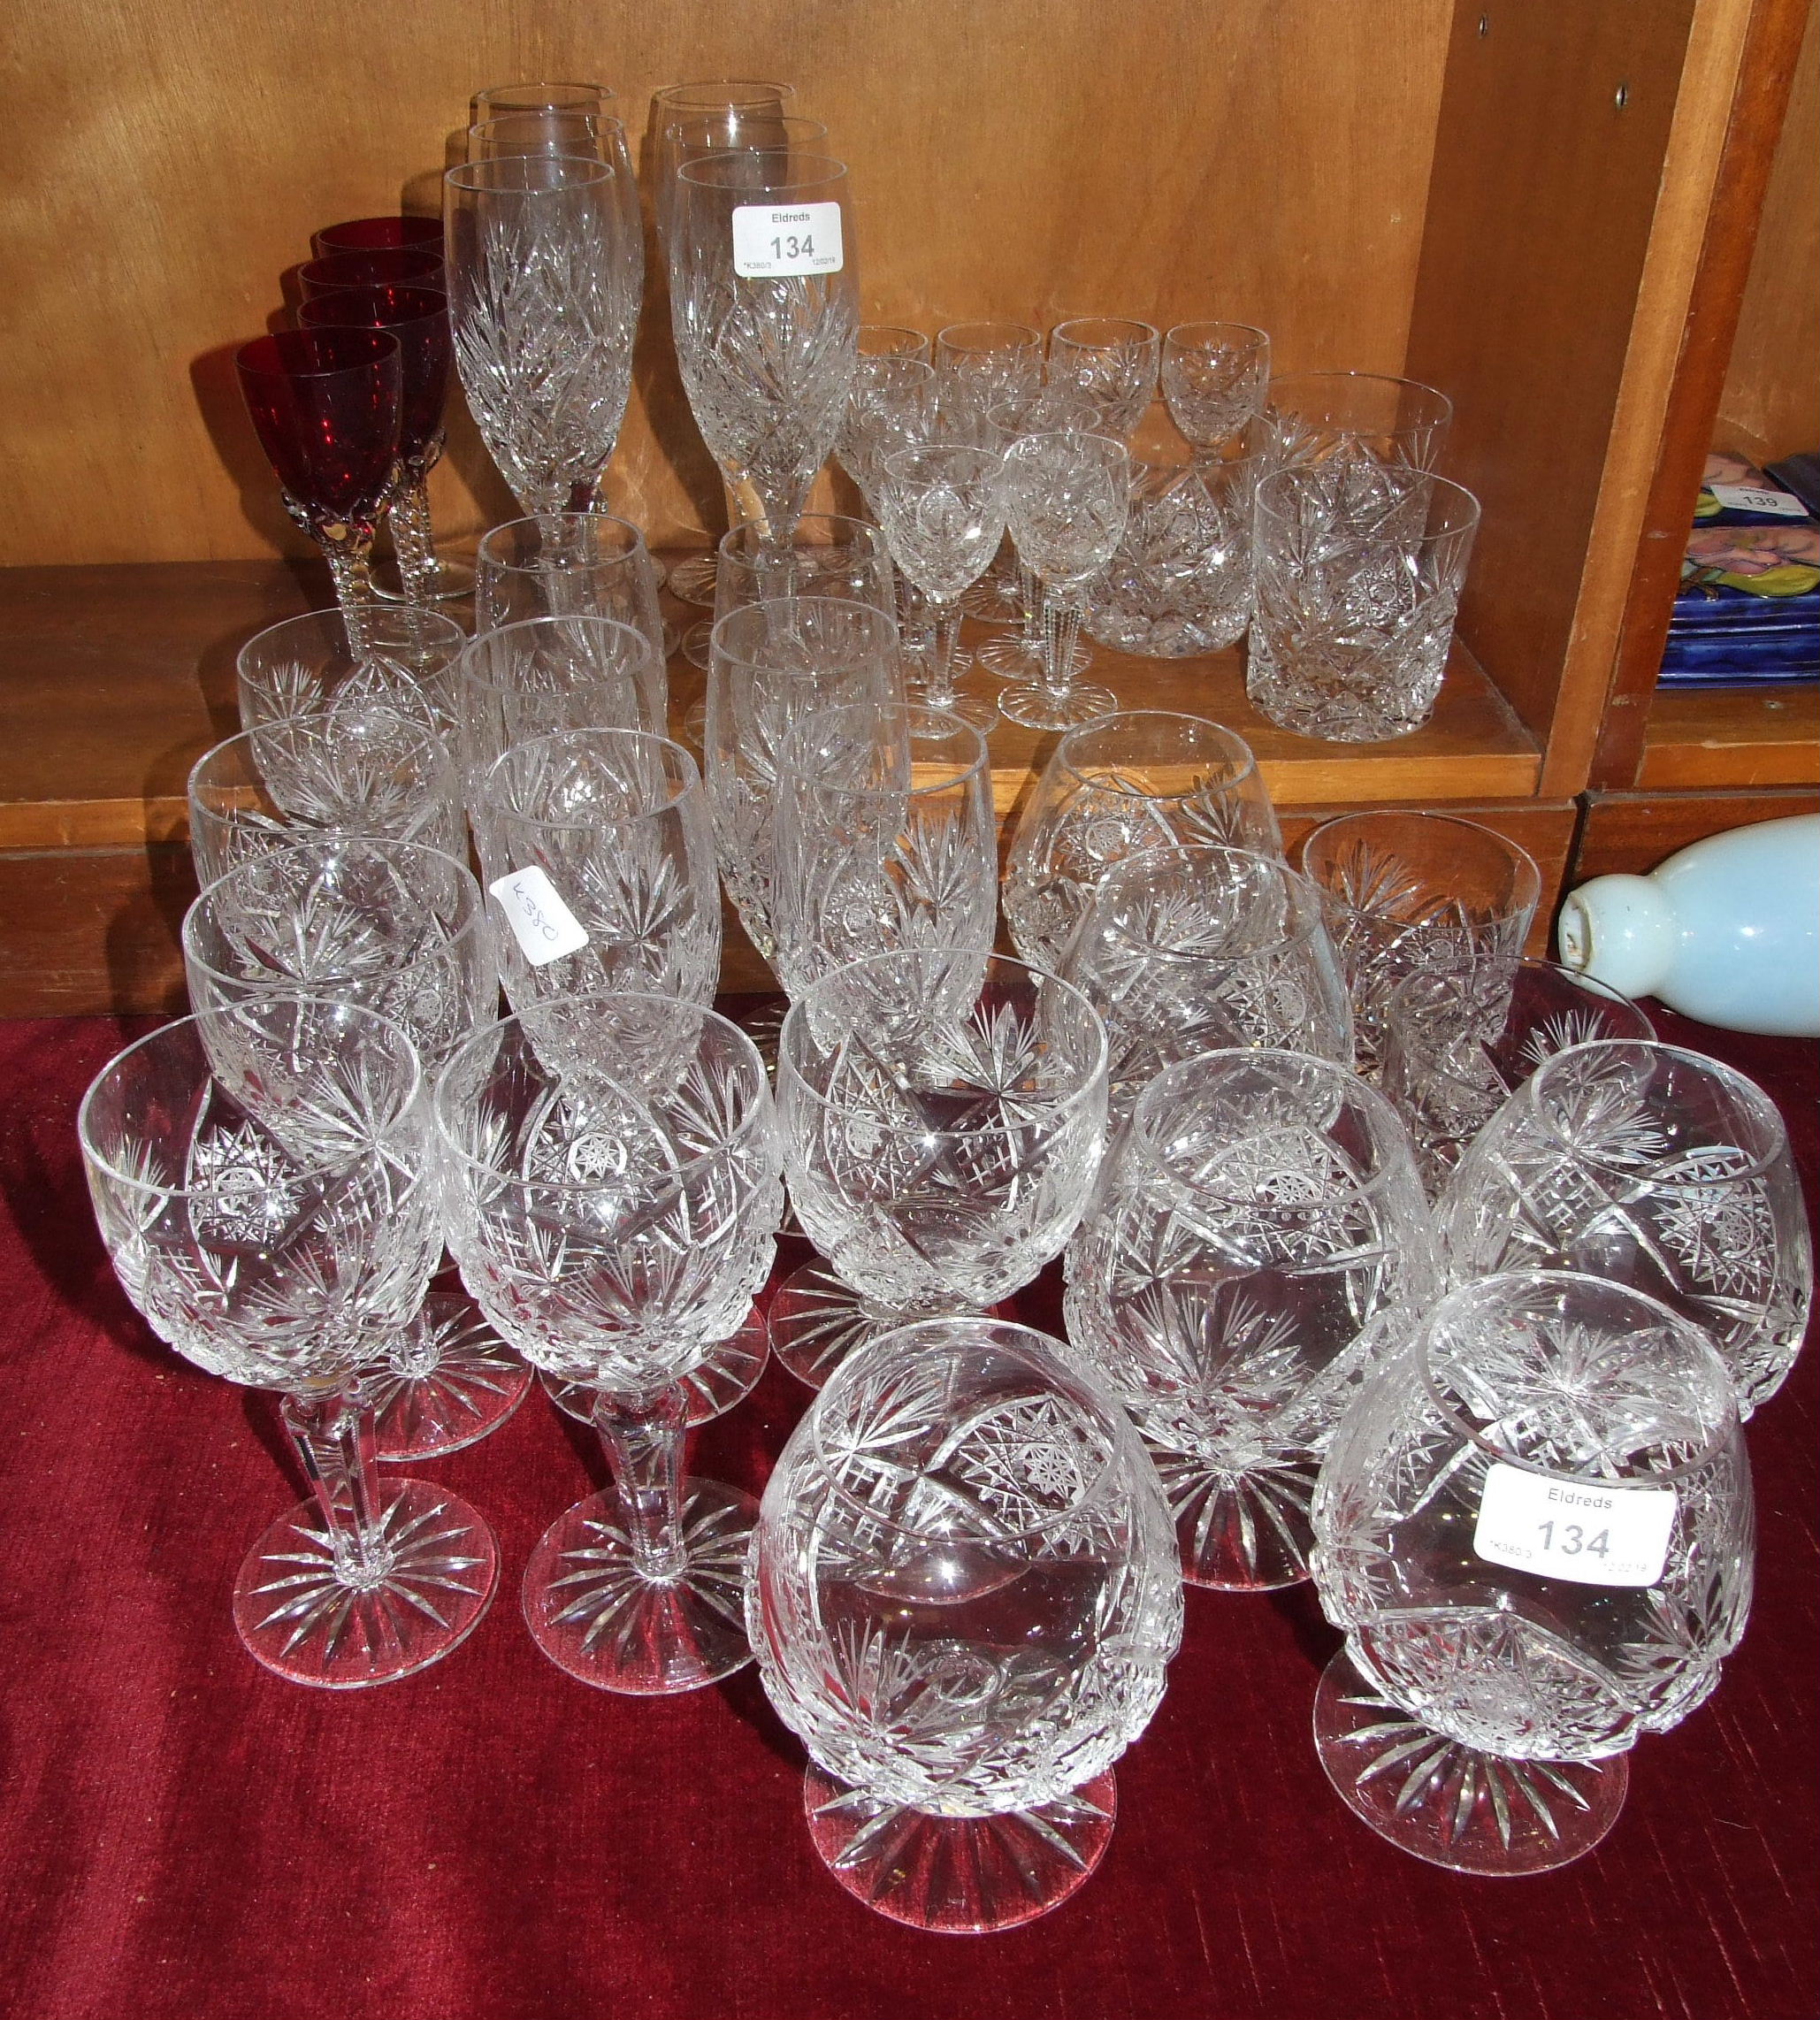 A part-suite of cut-glass drinking glasses.